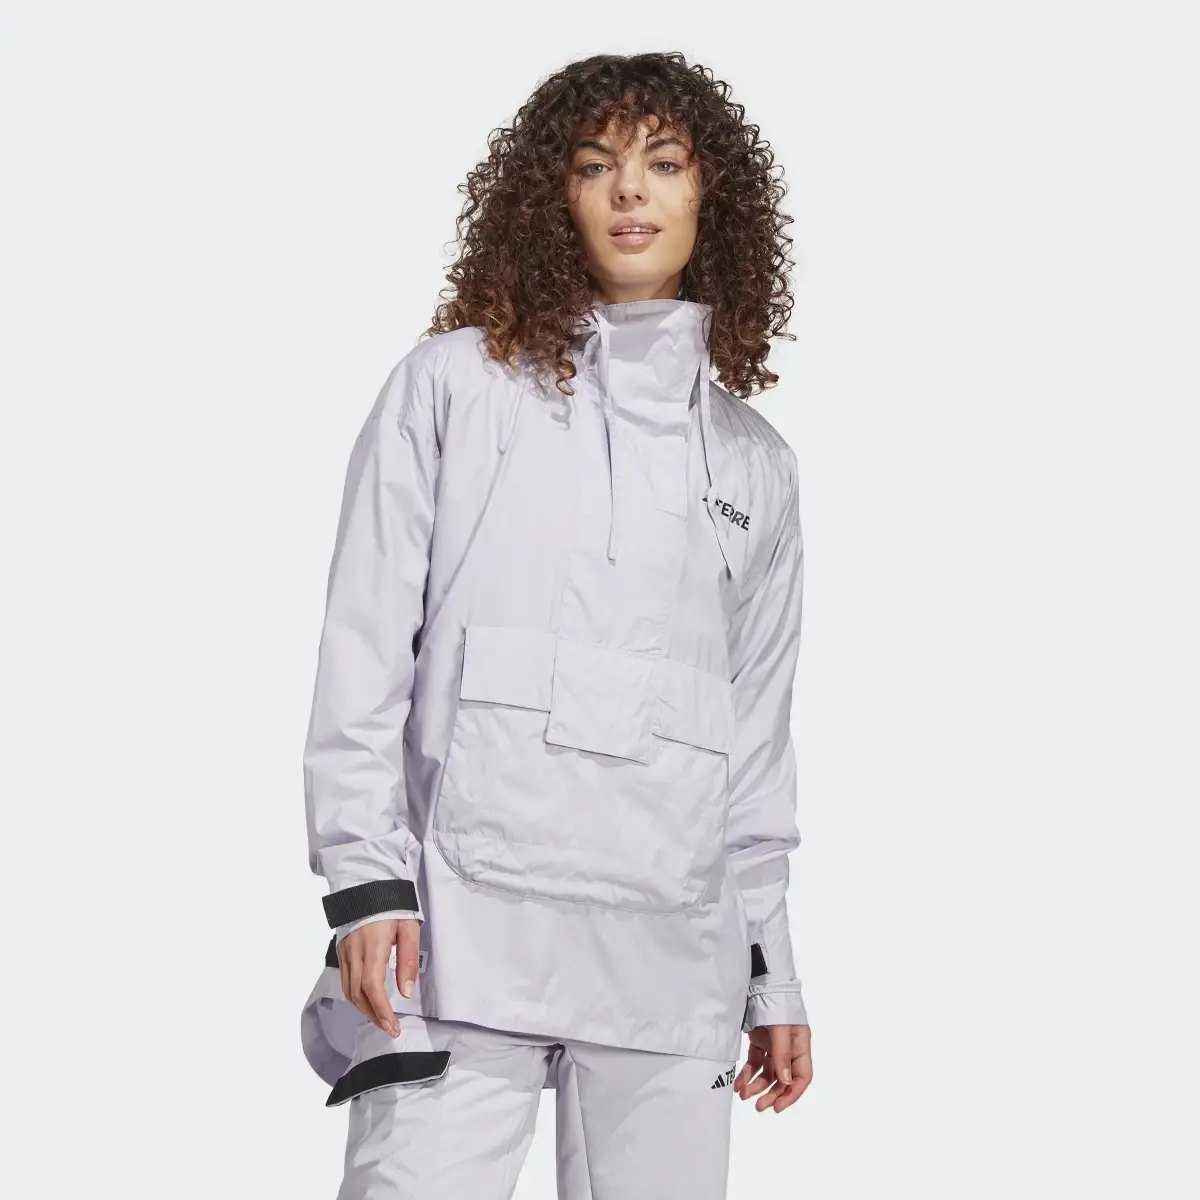 Adidas TERREX Made to Be Remade Wind Anorak. 2